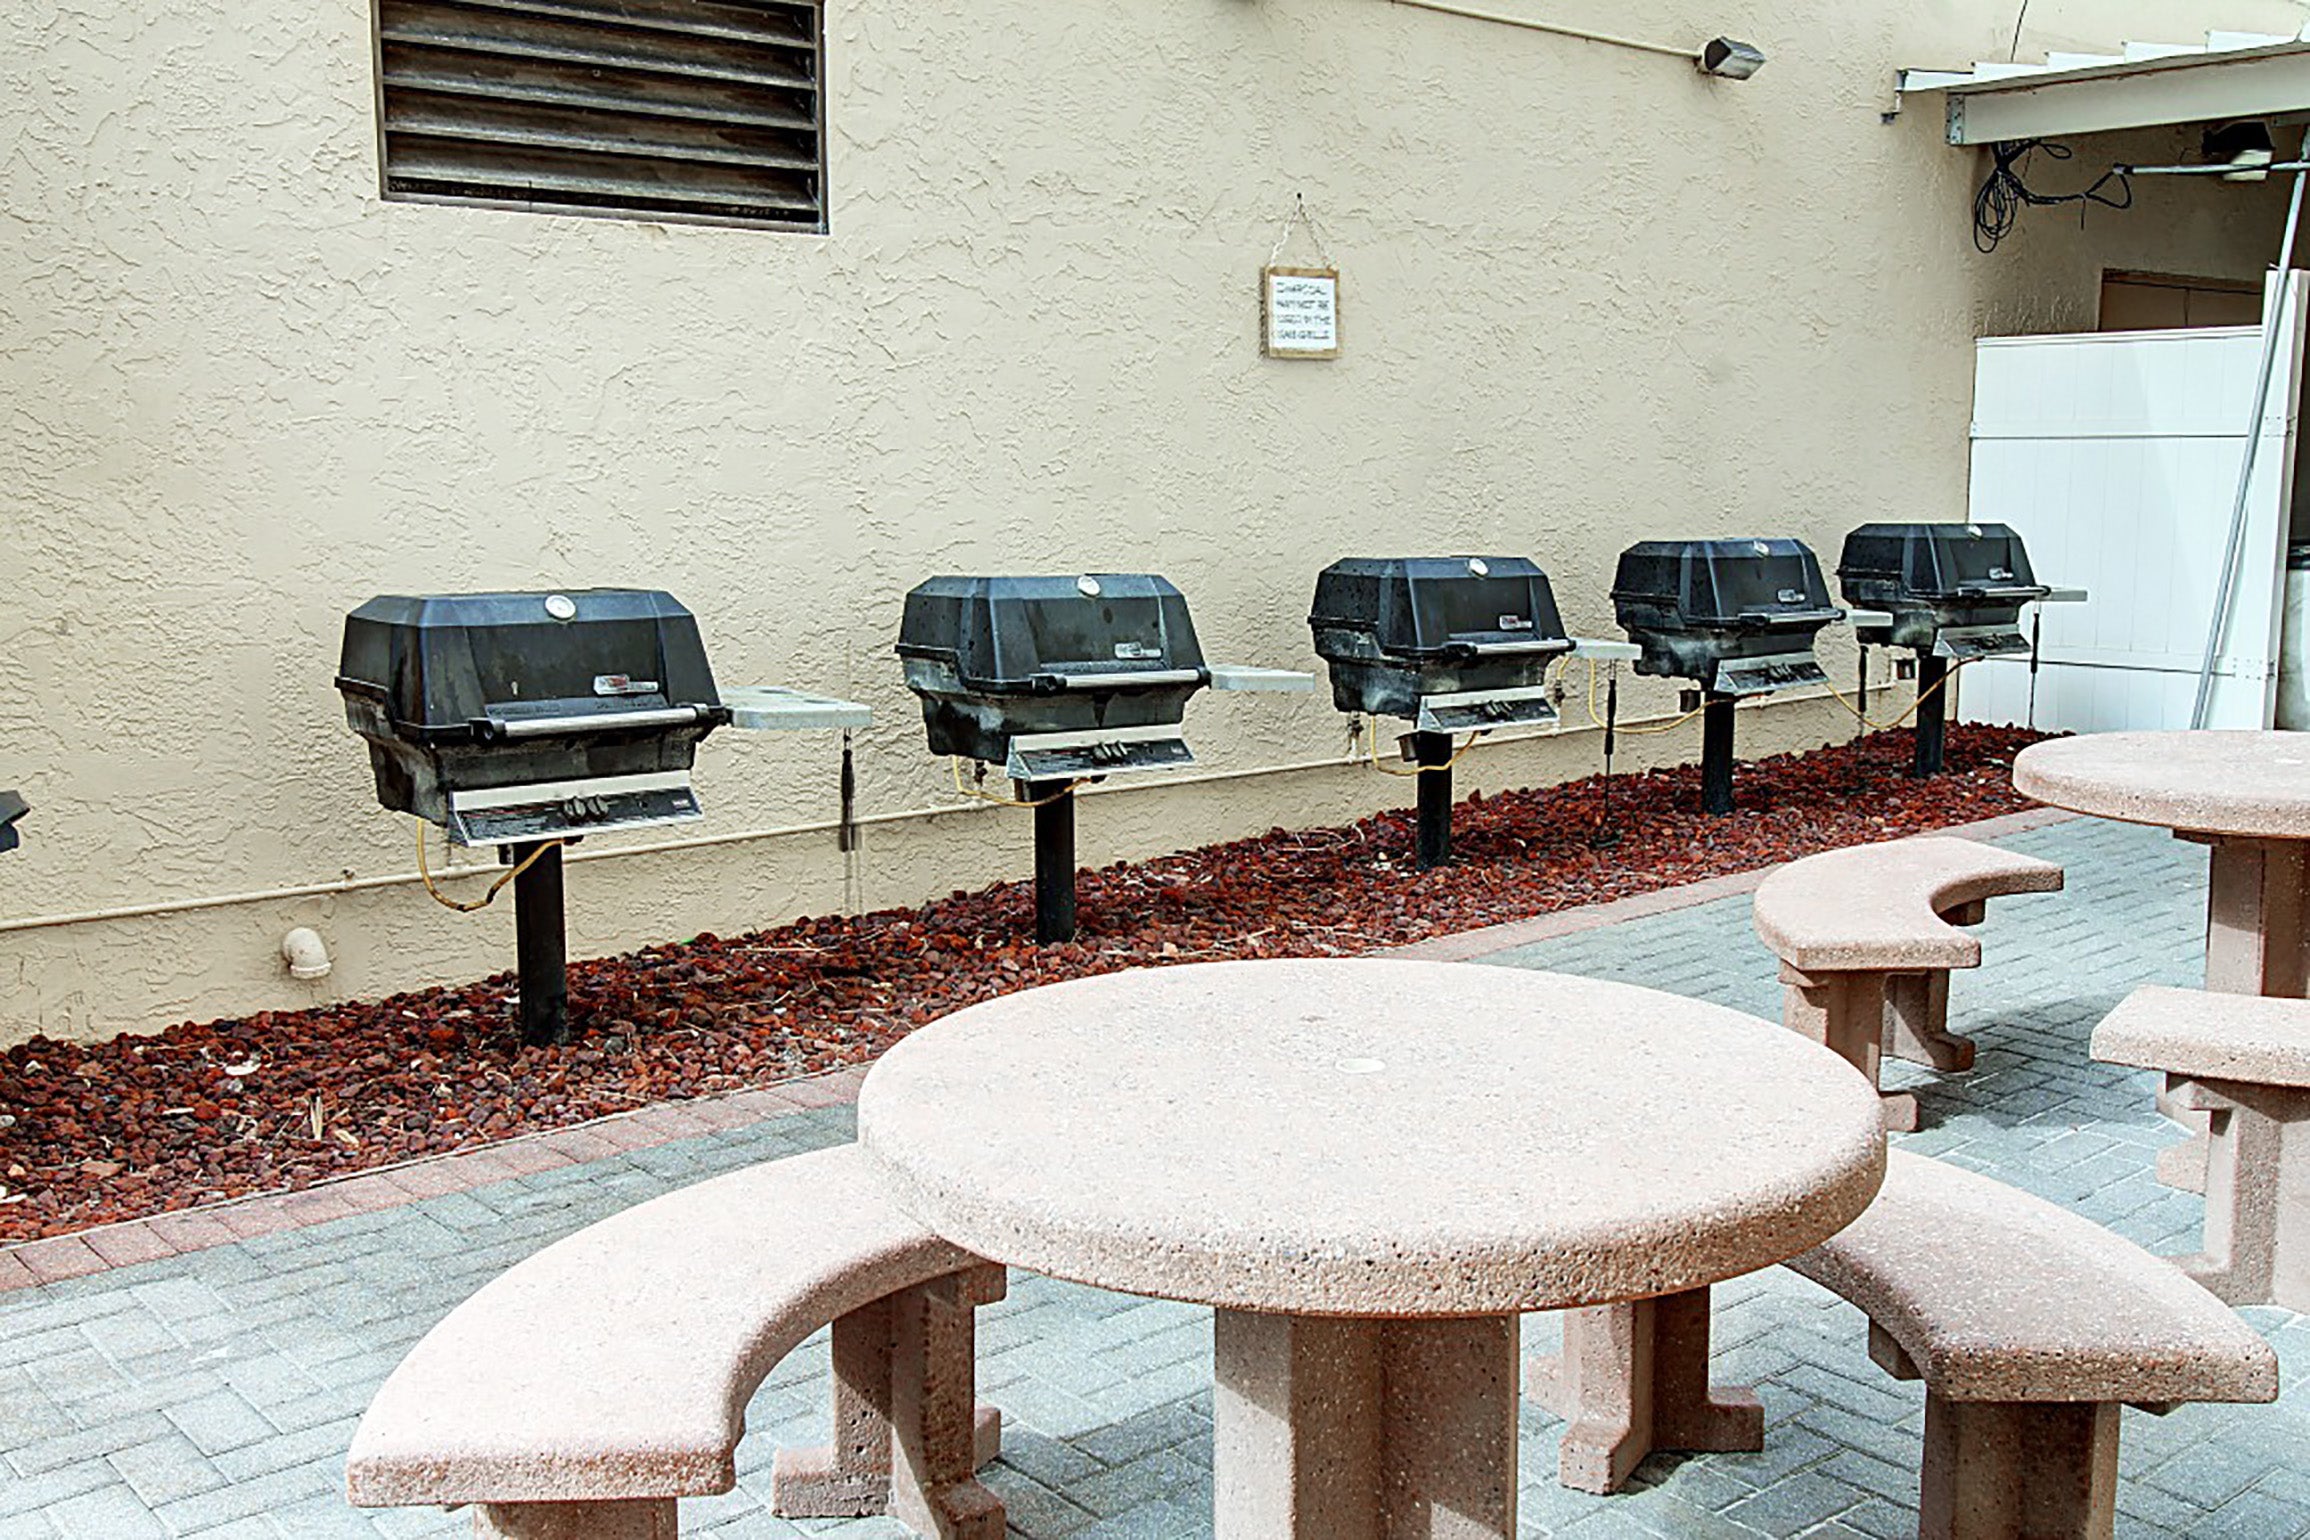 Grills and Picnic area